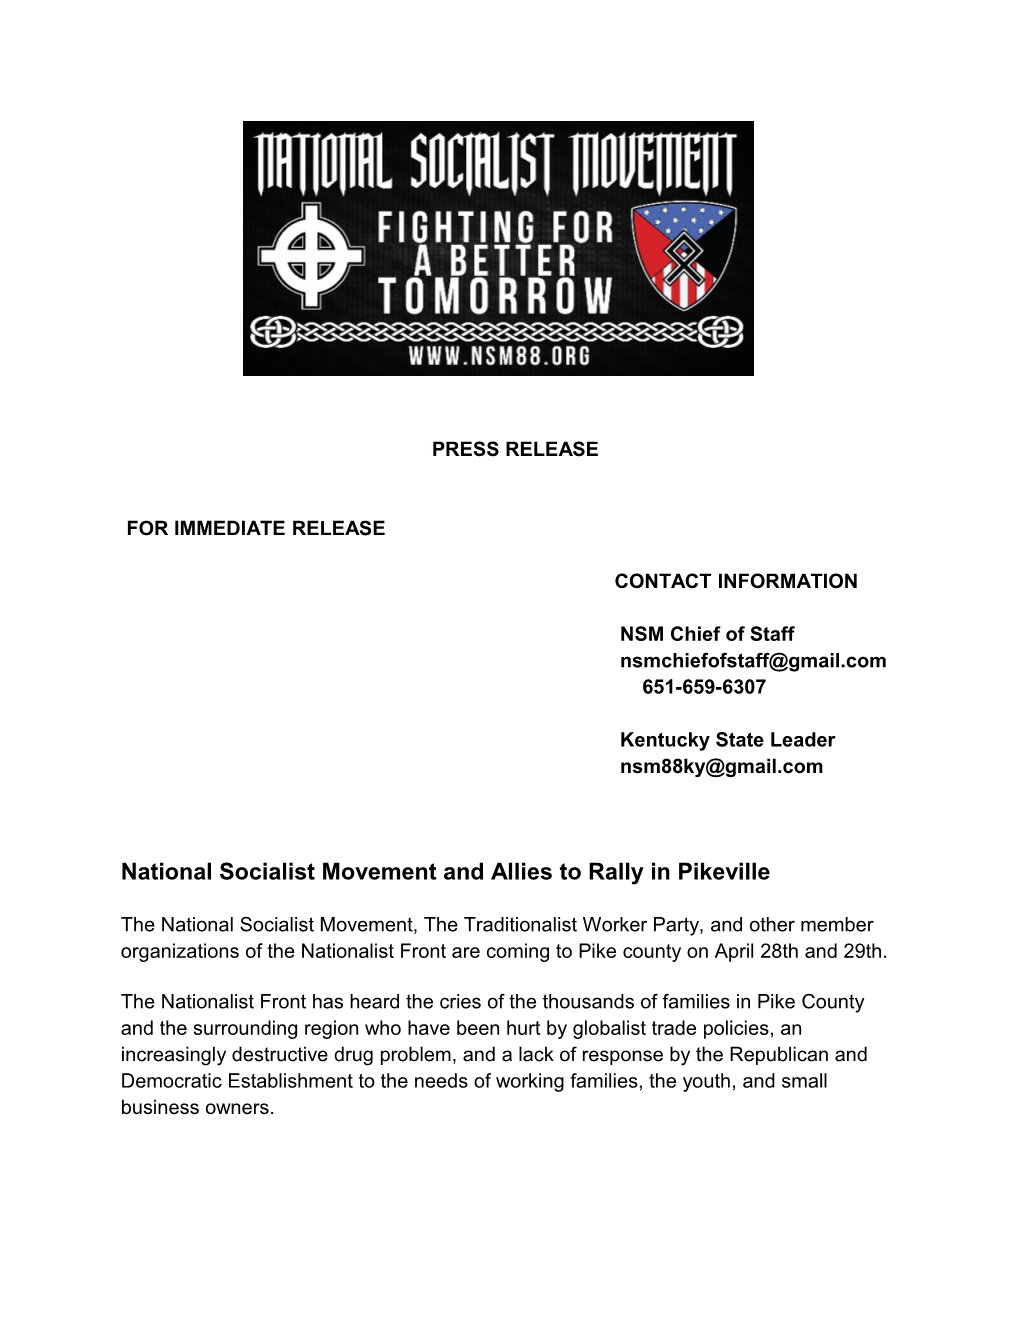 National Socialist Movement and Allies to Rally in Pikeville